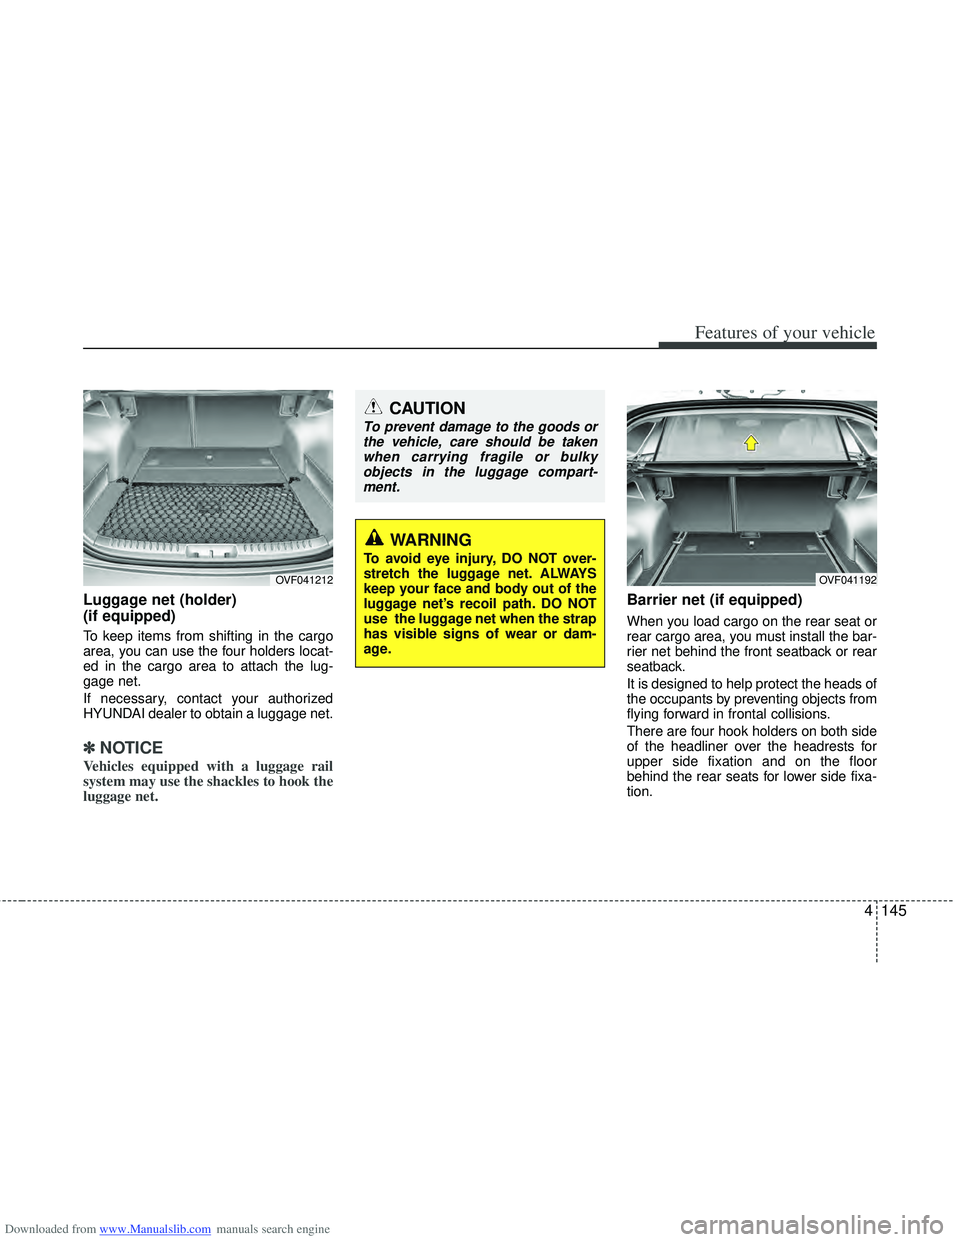 HYUNDAI I40 2019  Owners Manual Downloaded from www.Manualslib.com manuals search engine 4145
Features of your vehicle
Luggage net (holder) 
(if equipped)
To keep items from shifting in the cargo
area, you can use the four holders l